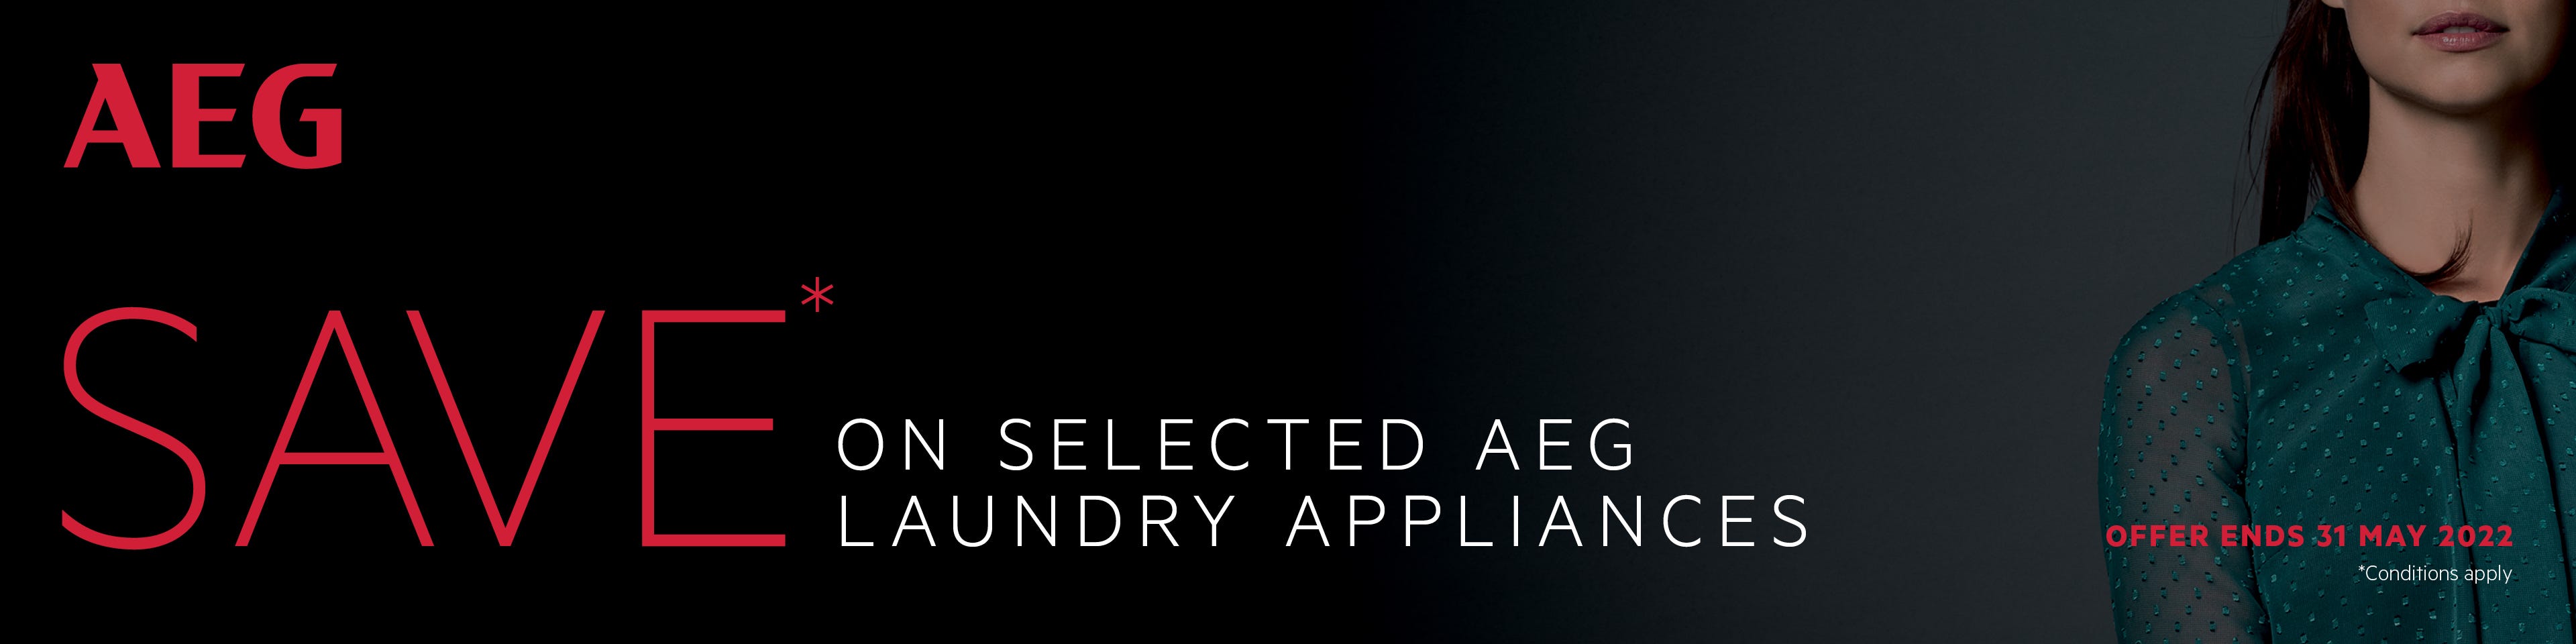 Save 5%* on selected AEG front load washers and energy efficient heat pump dryers at e&s. Offer ends 31/05/22. At an e&s near you.